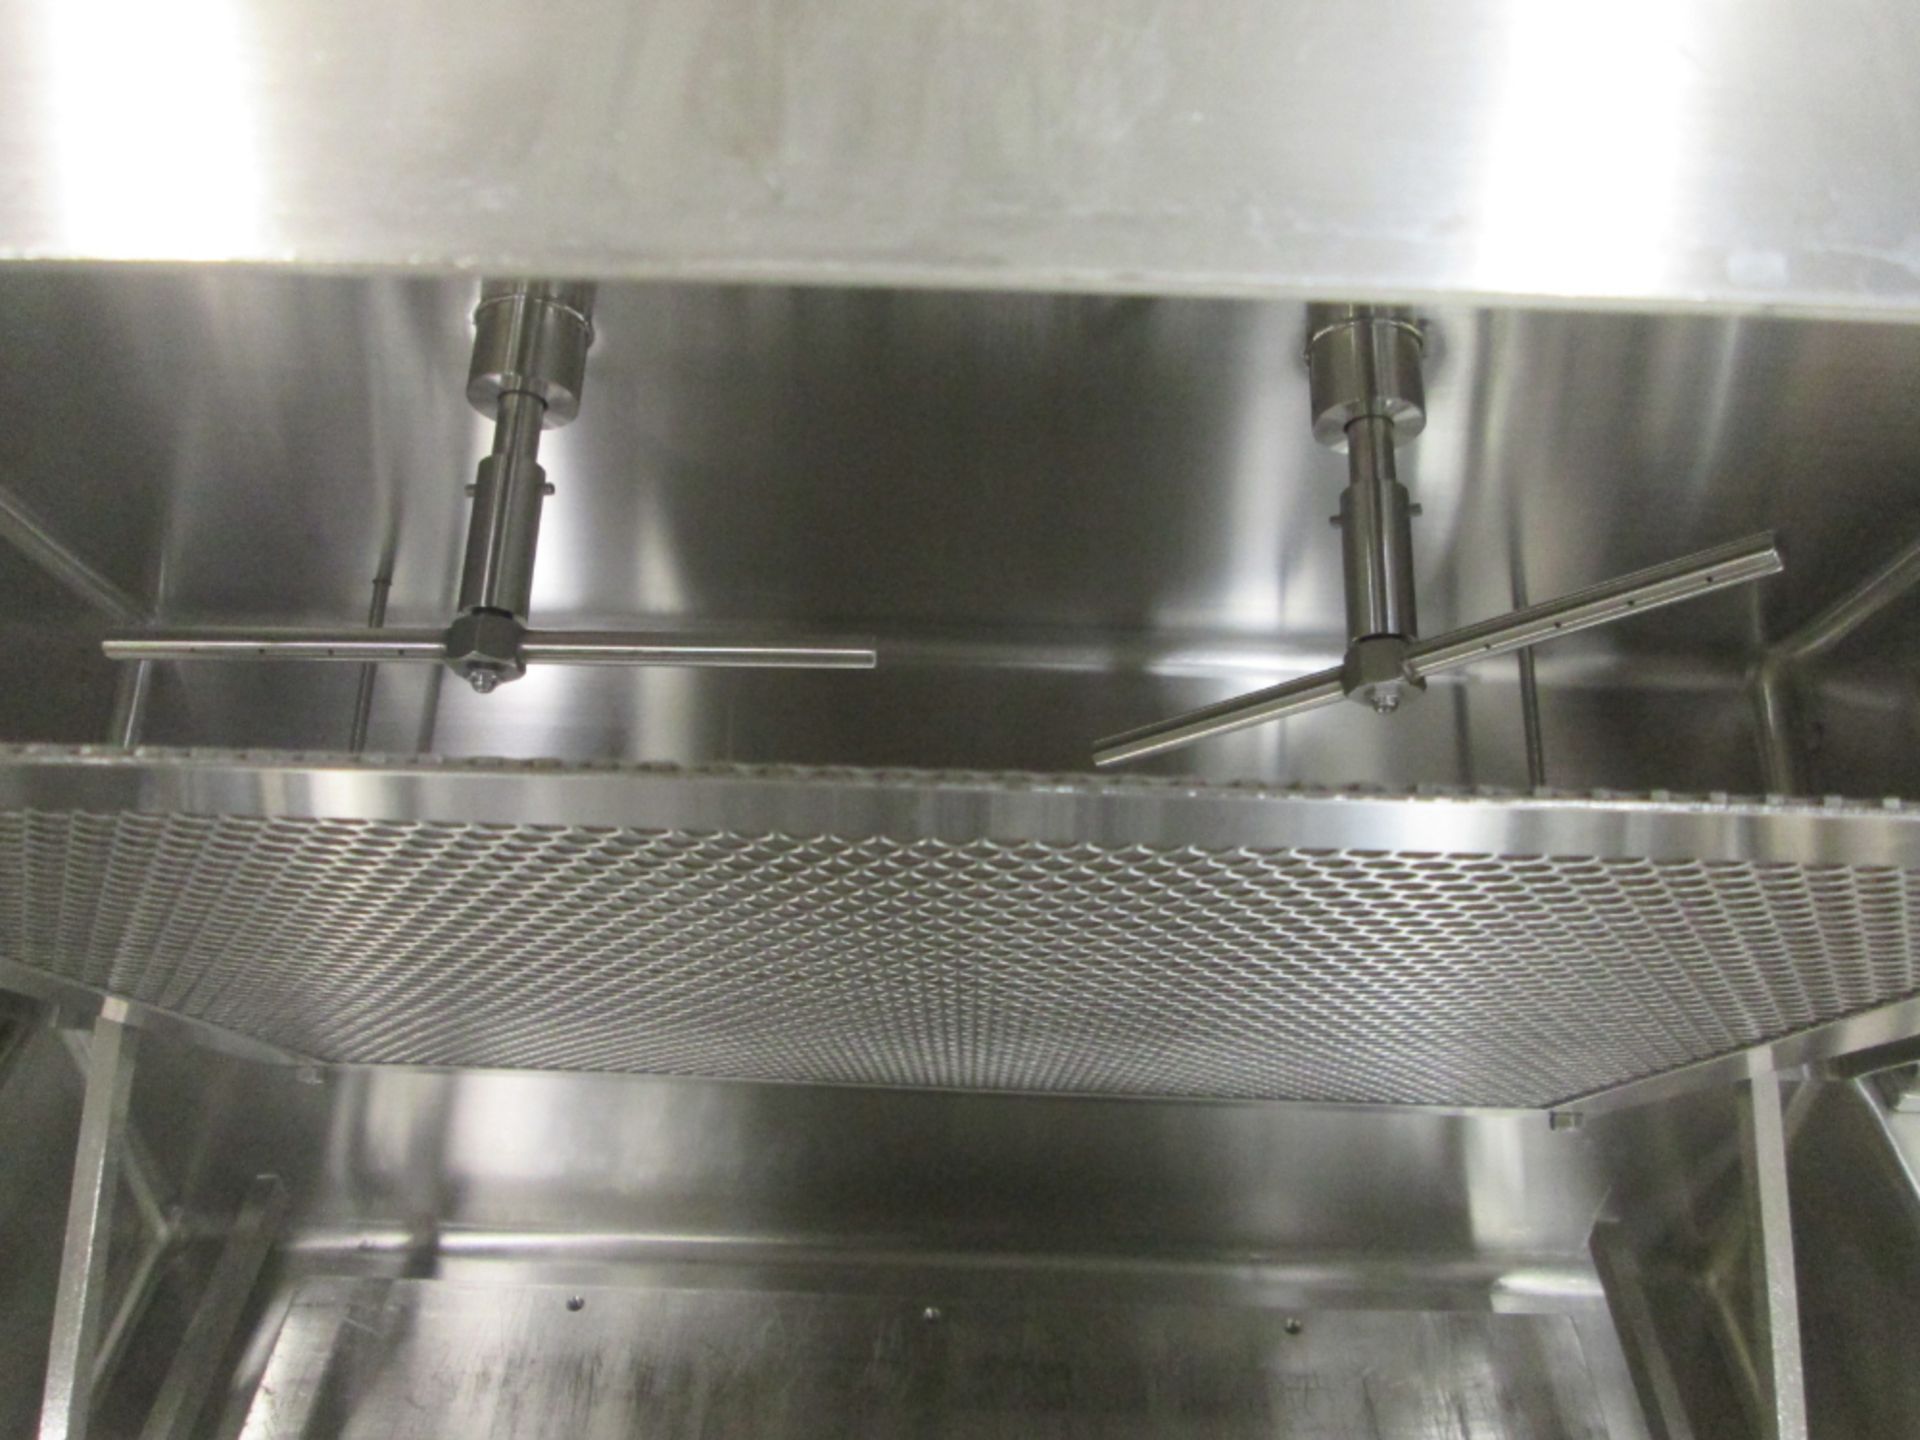 Cozzoli GW-24 Batch Vial Washer - Image 4 of 11